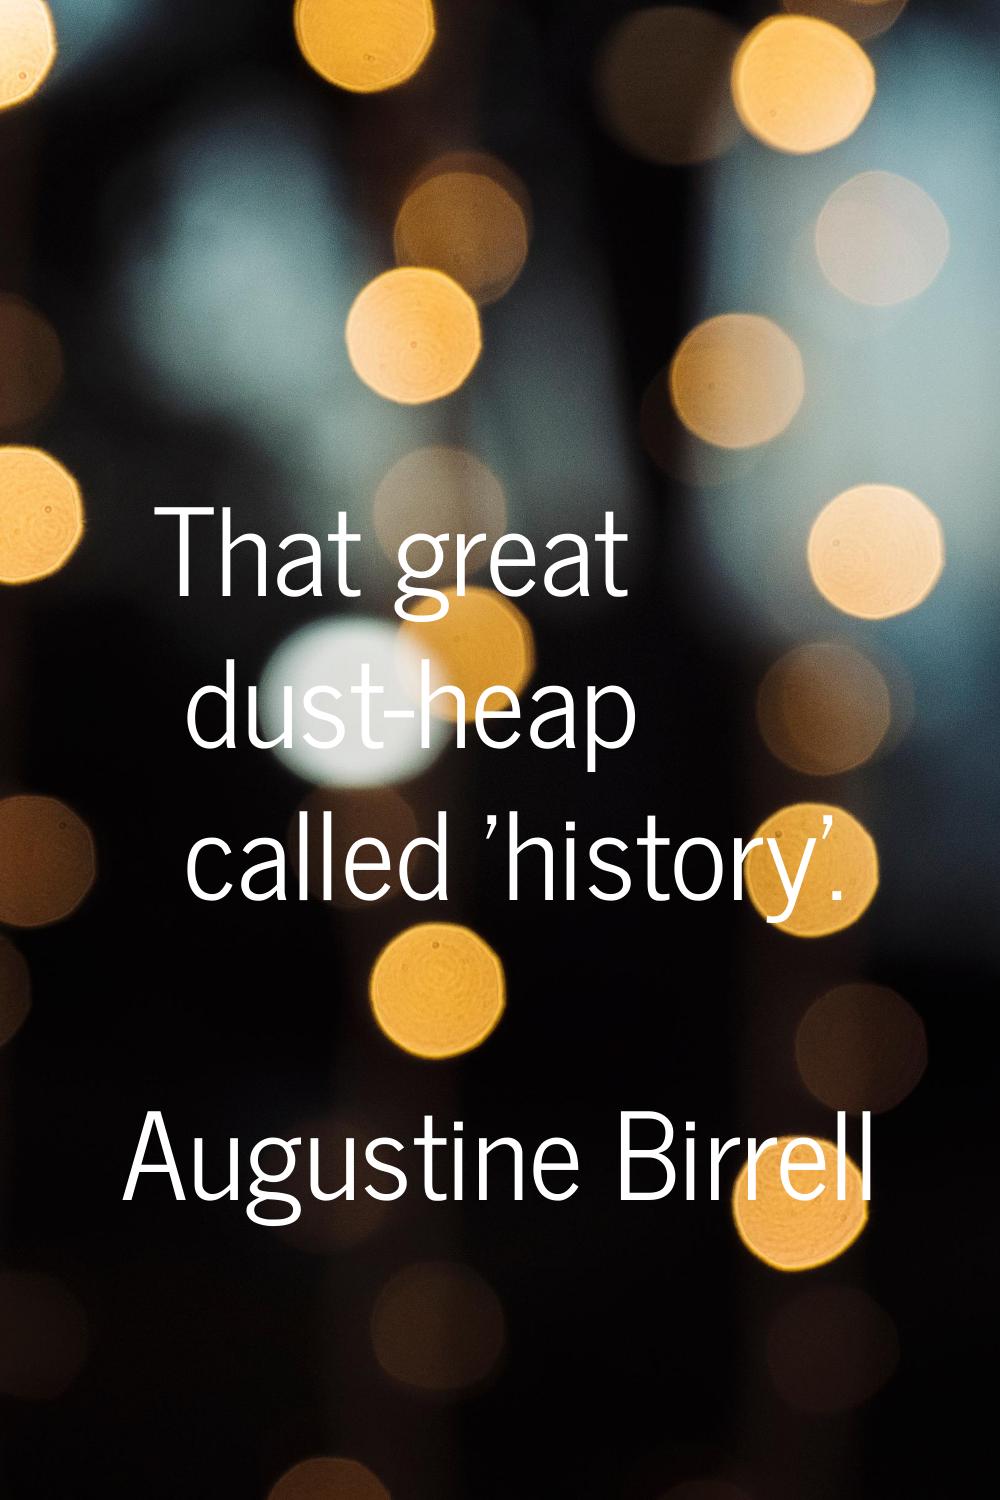 That great dust-heap called 'history'.